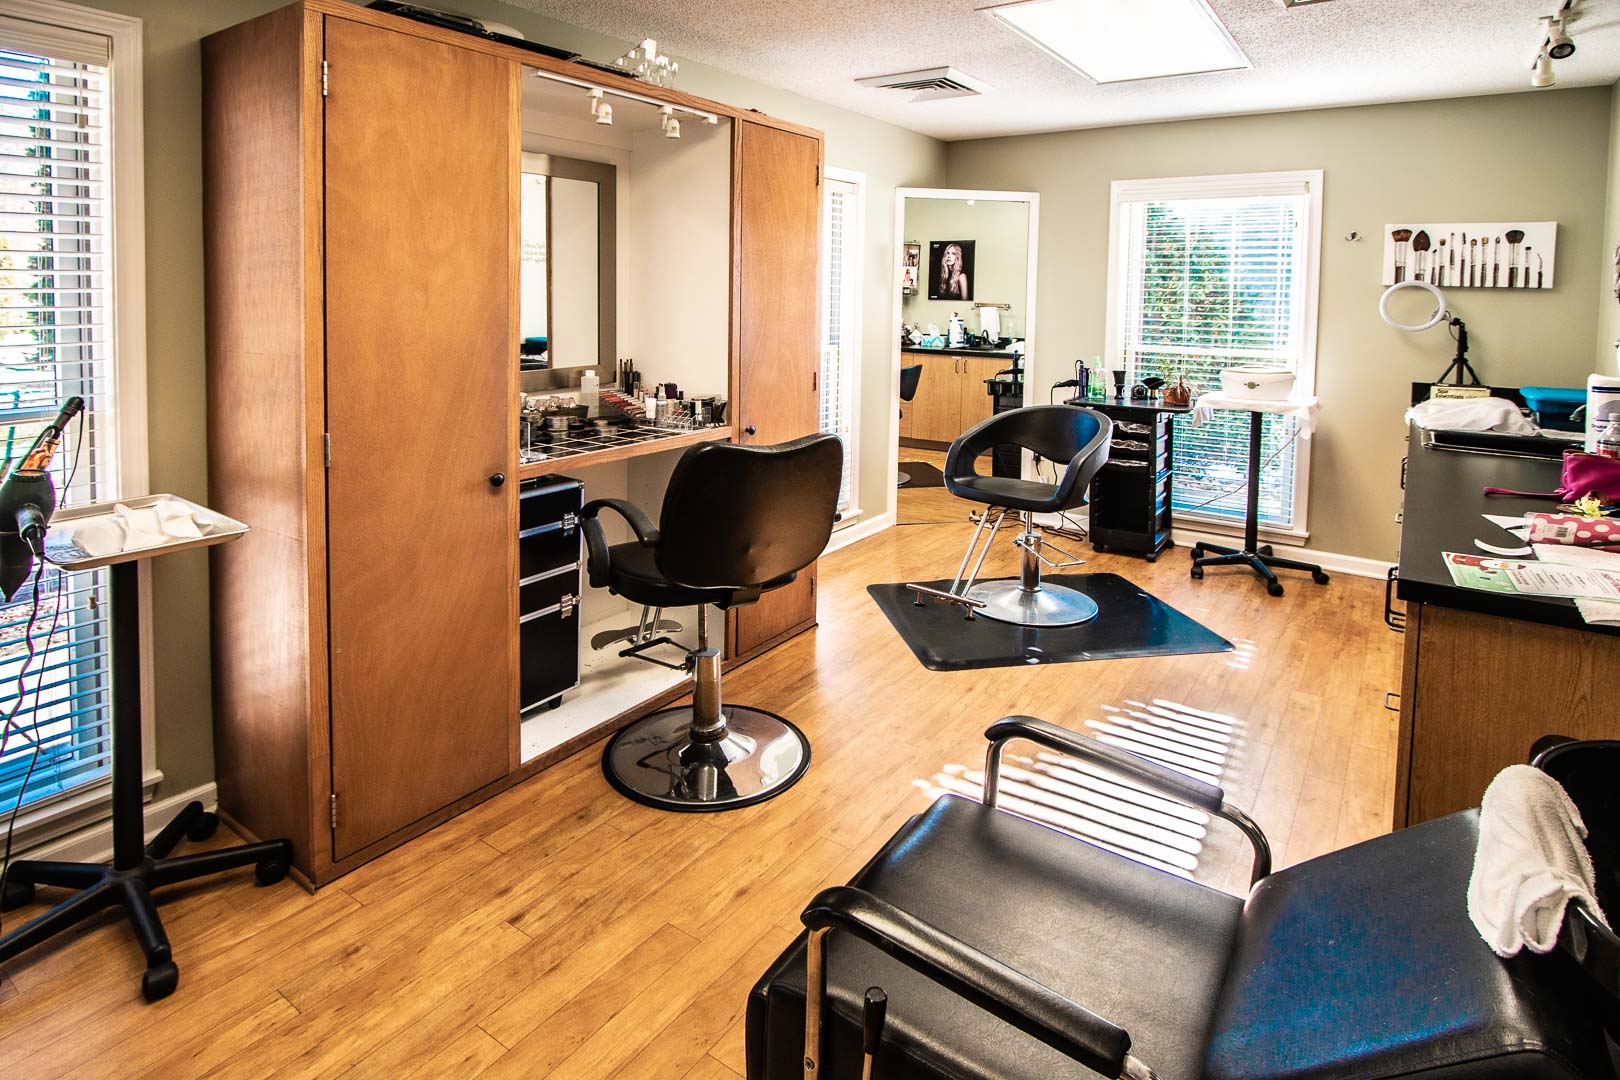 Hair salons available at VRI's Fairways of the Mountains in North Carolina.